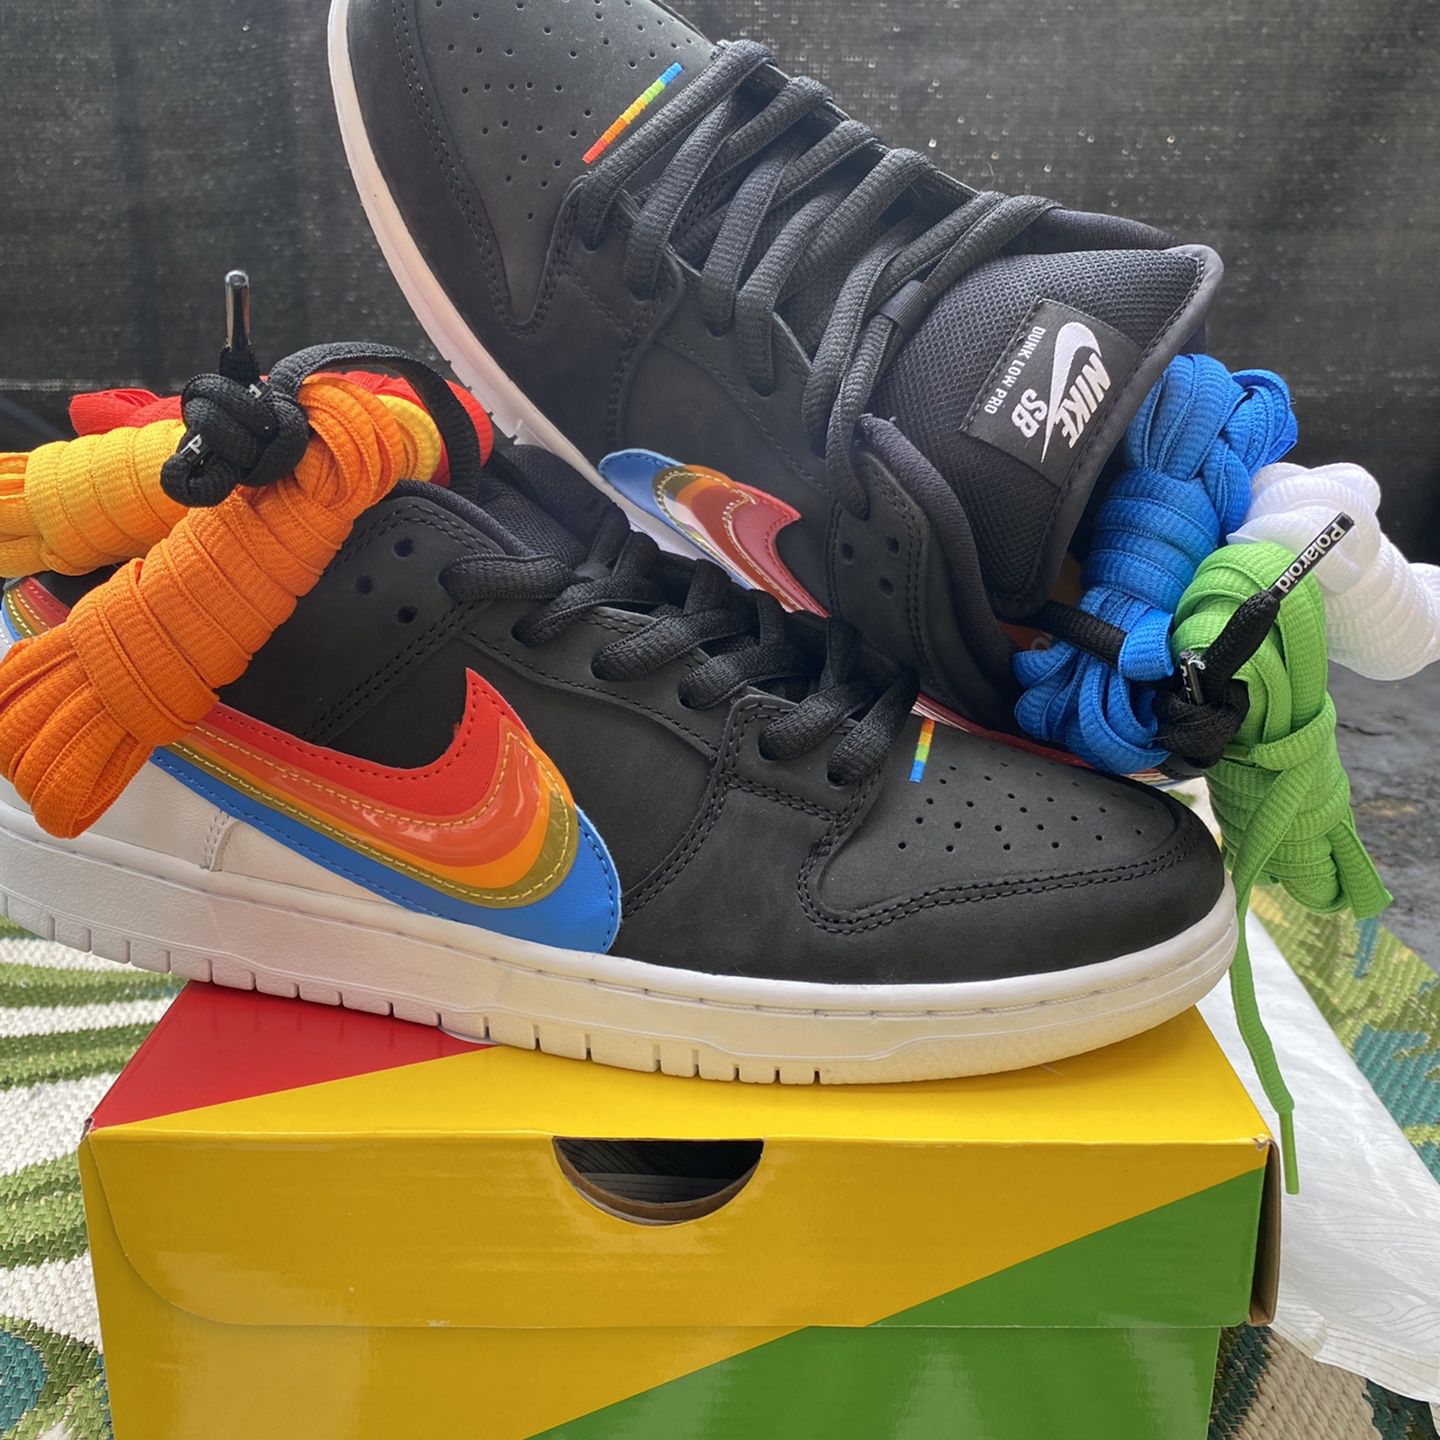 Nike SB Dunk low “Polaroid” for Sale in Laurel, MD - OfferUp